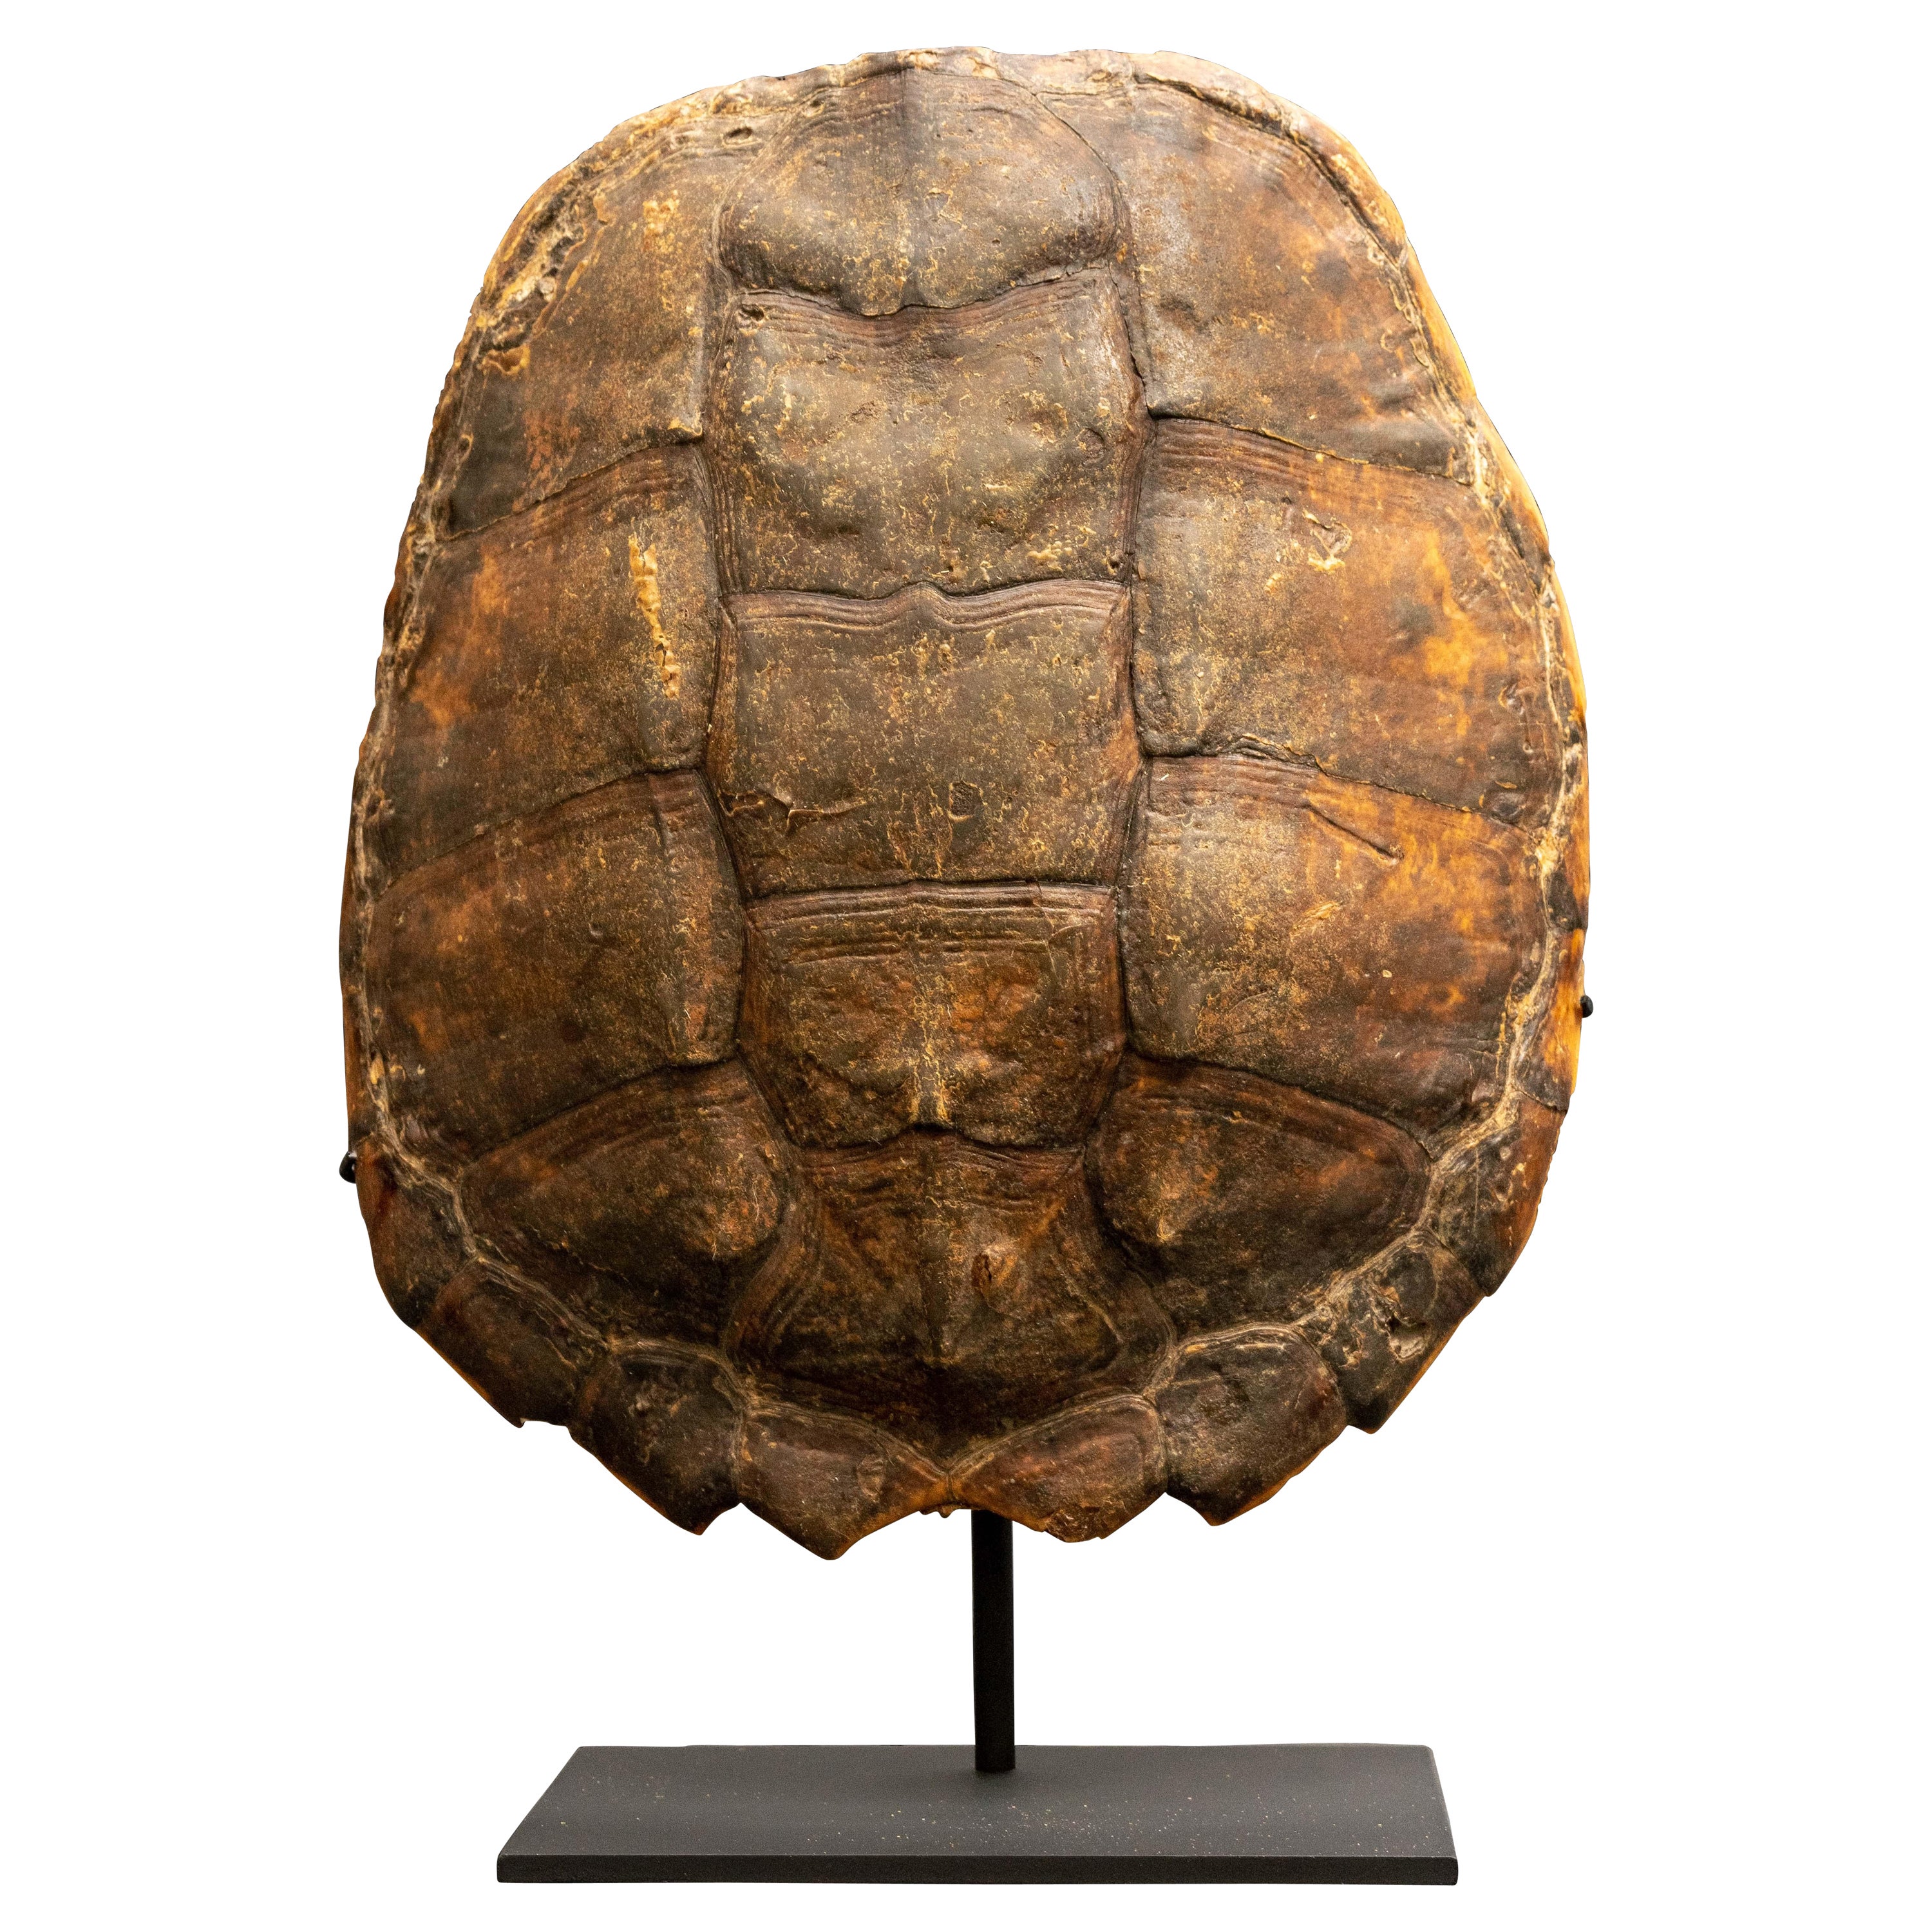 Mounted Snapping Turtle Shell